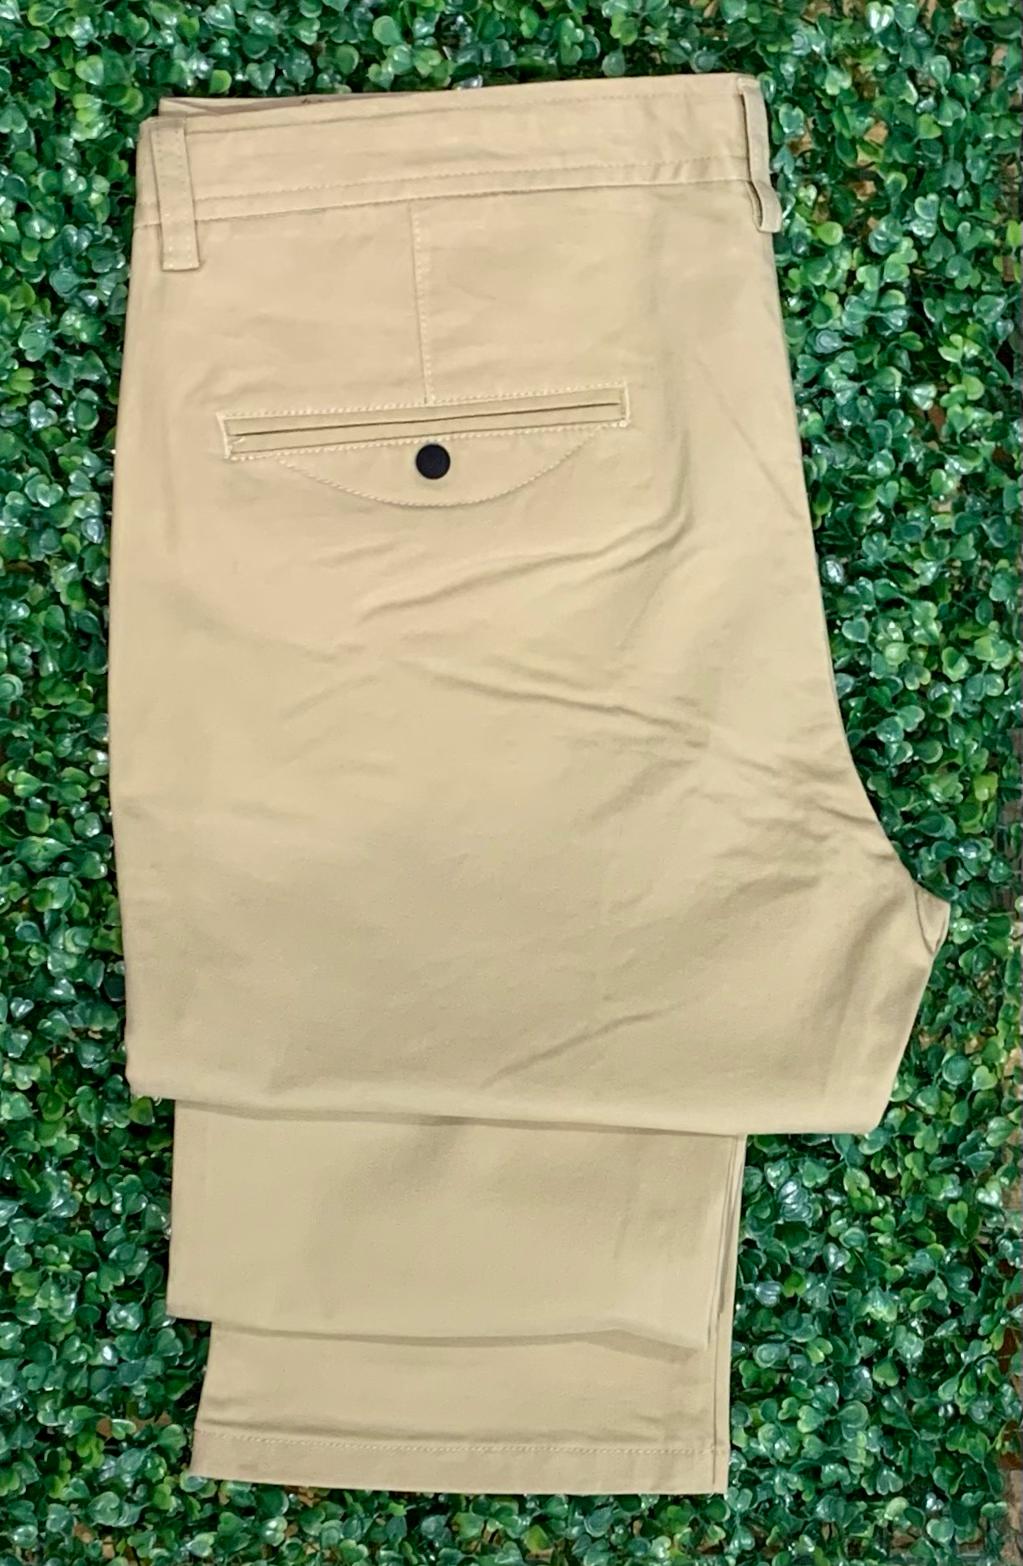 Casual pants color sand